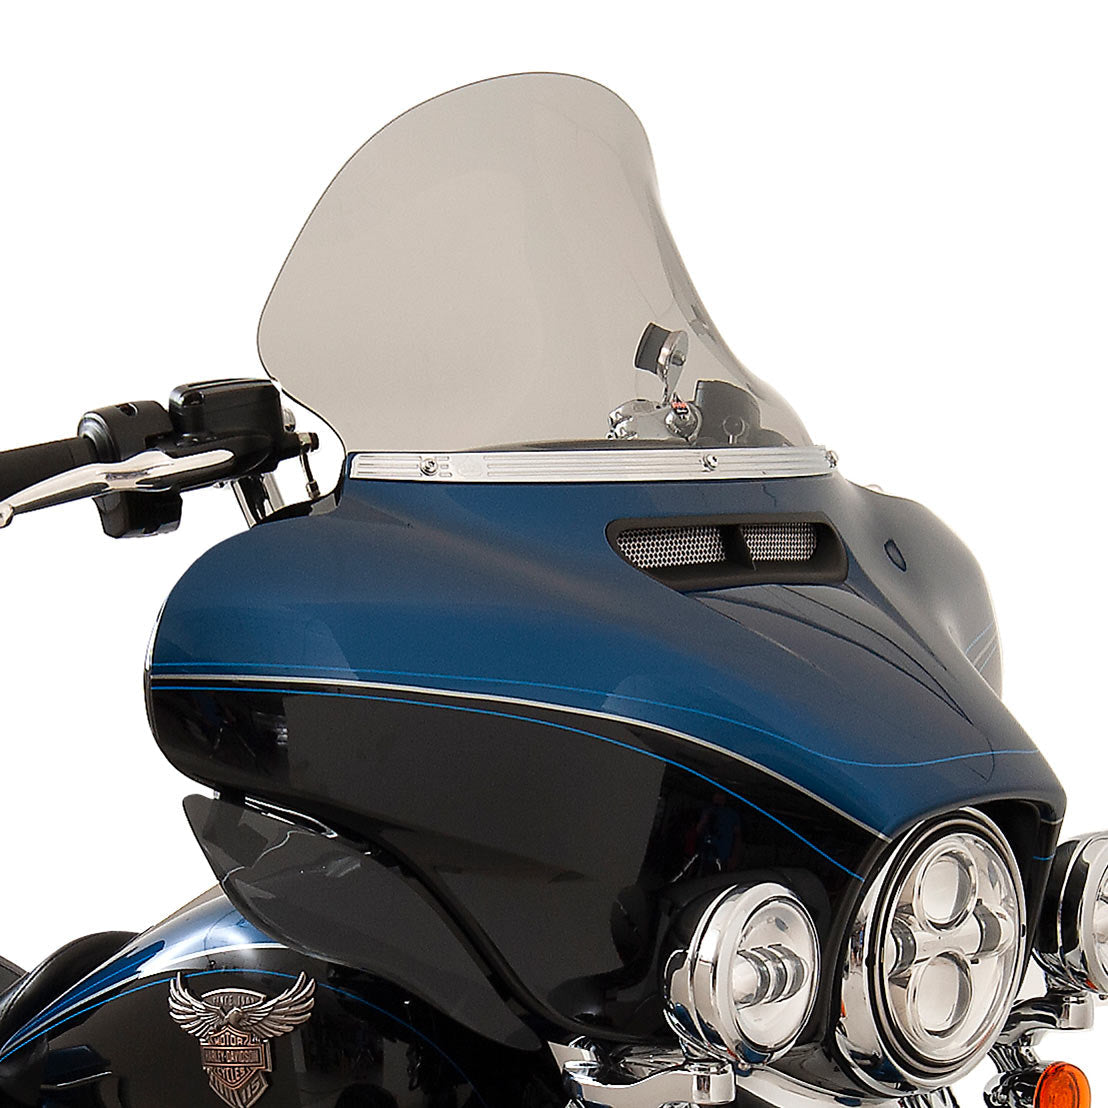 11.5" Tint Flare™ Windshield for 2014-2023 Harley-Davidson FLH Motorcycle Models(11.5" Tint)